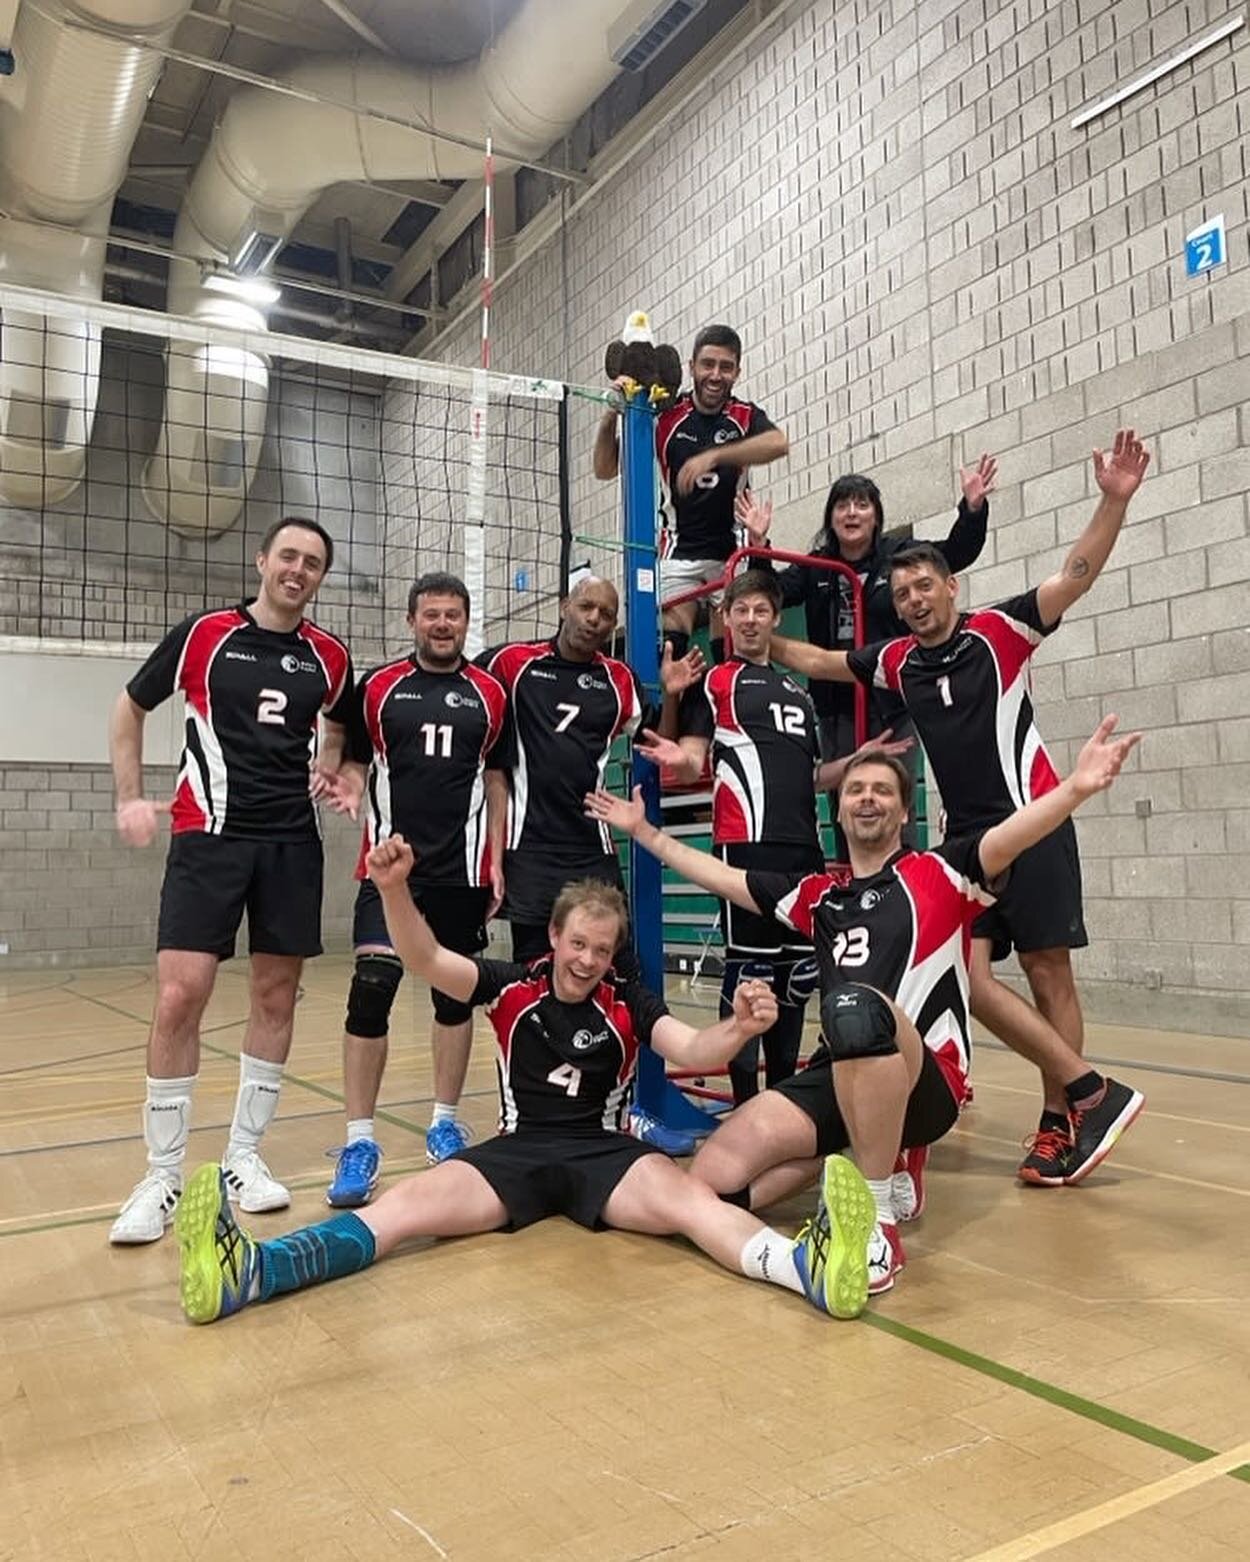 Malory Eagles beat Phoenix 3-1 at London League Men&rsquo;s Devision 1B tonight! 

The squad had only 1 middle and no libero, 8 players in total for the game, however they proved that their experience makes it work! 

The MVP of the match goes to @em